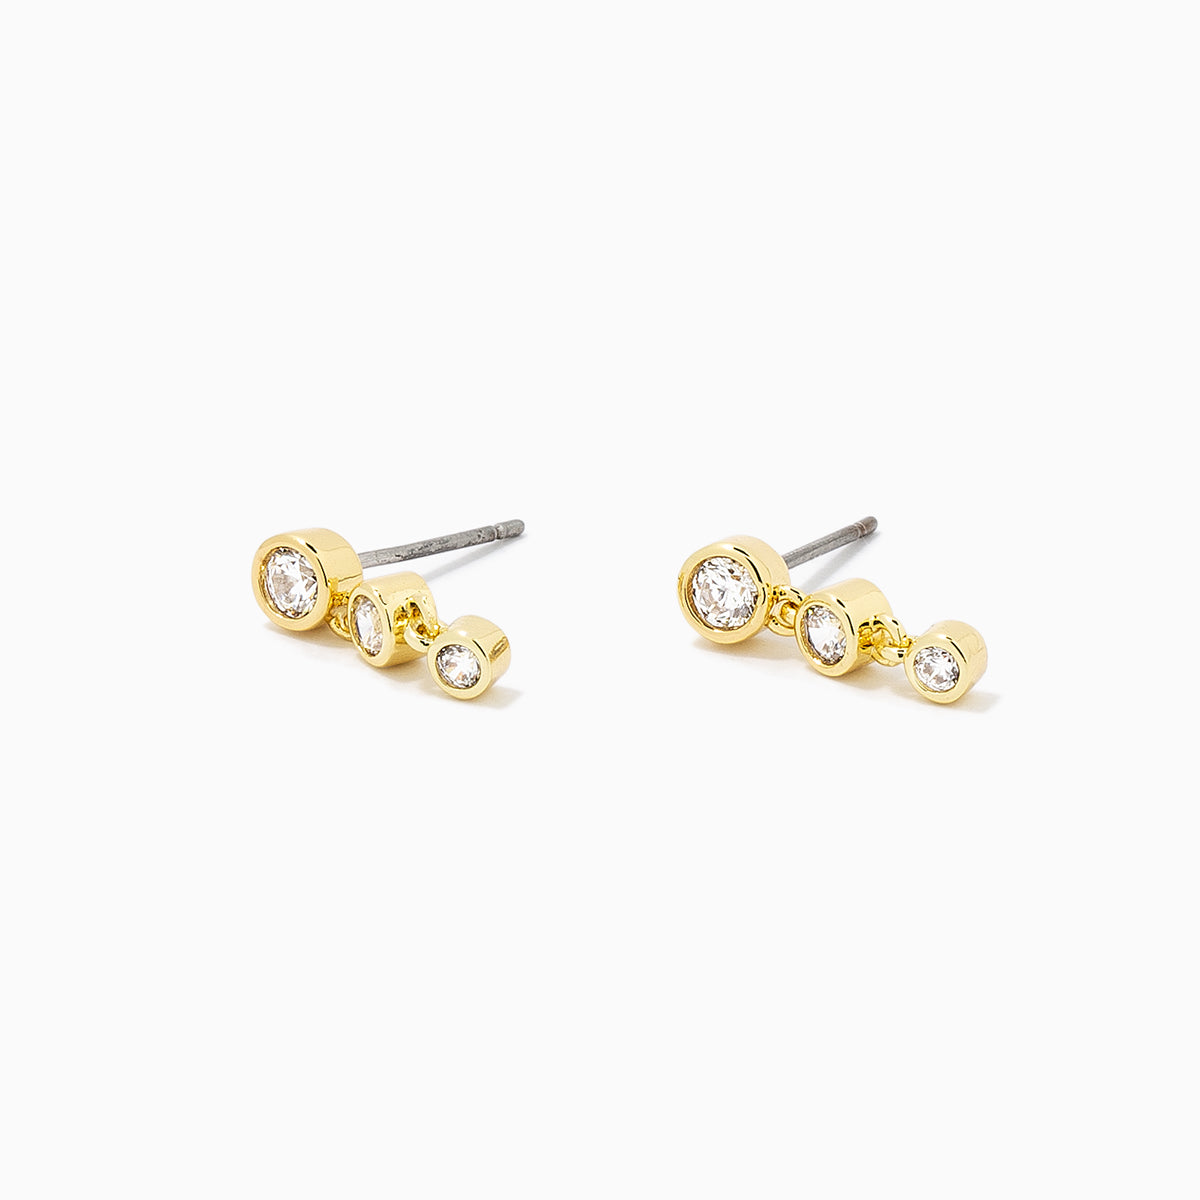 Scandal Earrings | Gold | Product Detail Image | Uncommon James